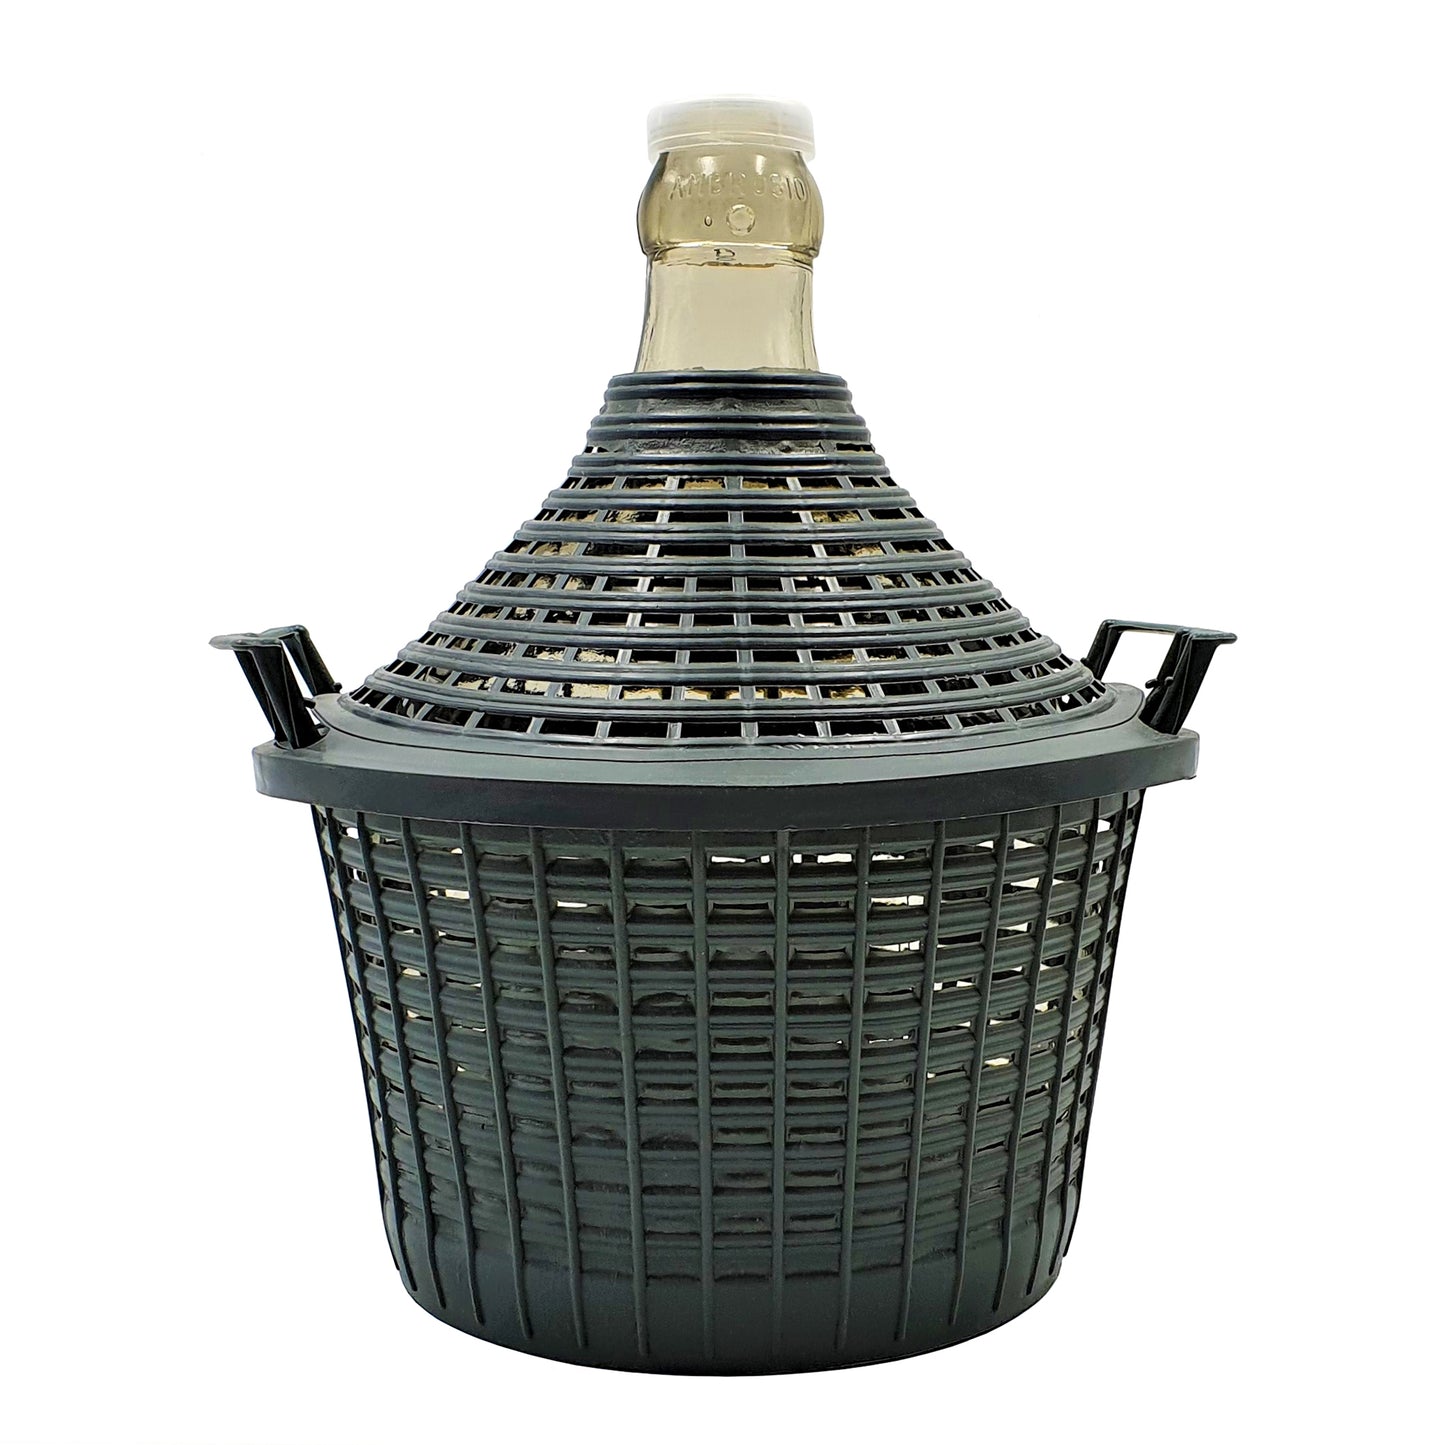 20 litre narrow neck demijohn with PVC basket and lid